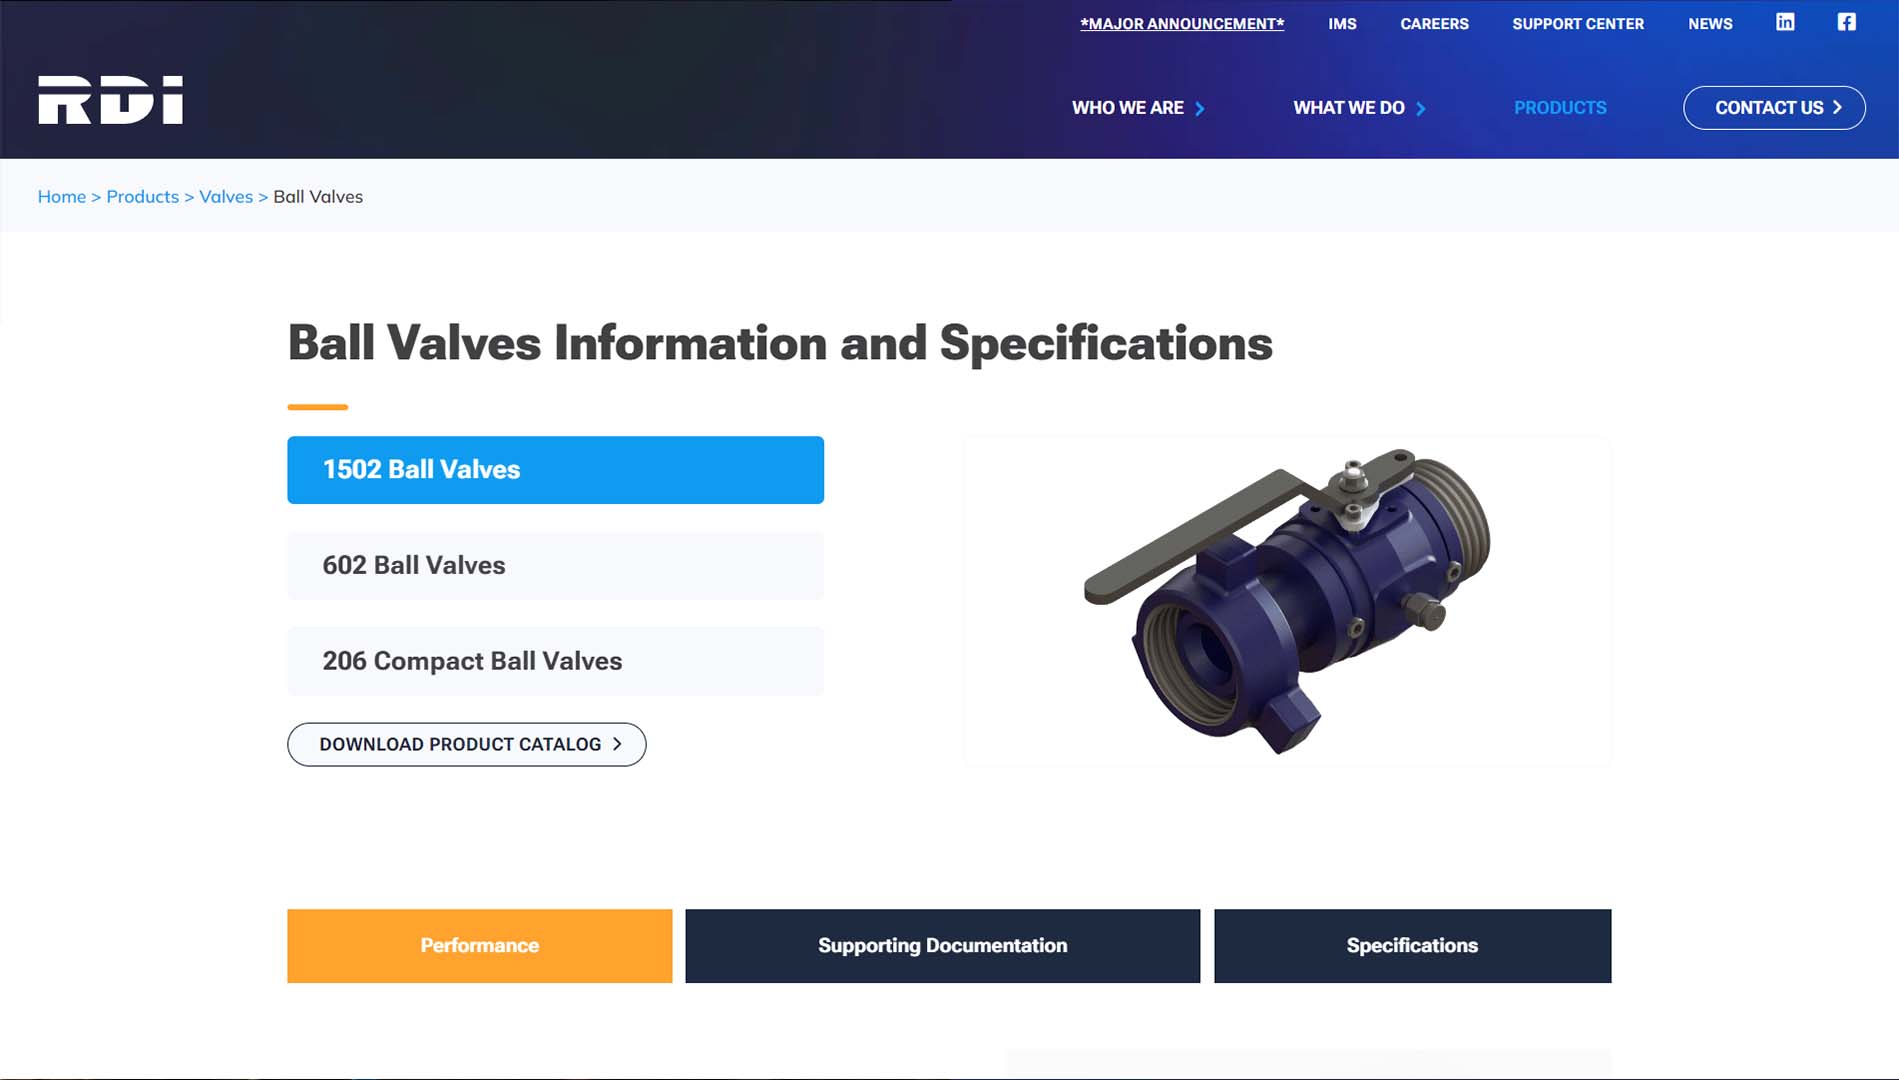 Web page from RDI showcasing a selection of ball valves with options for 1502, 602, and 206 compact ball valves, alongside a 3D rendered image of a blue ball valve, highlighting the download option for the product catalog and navigation tabs for performance, support, and specifications